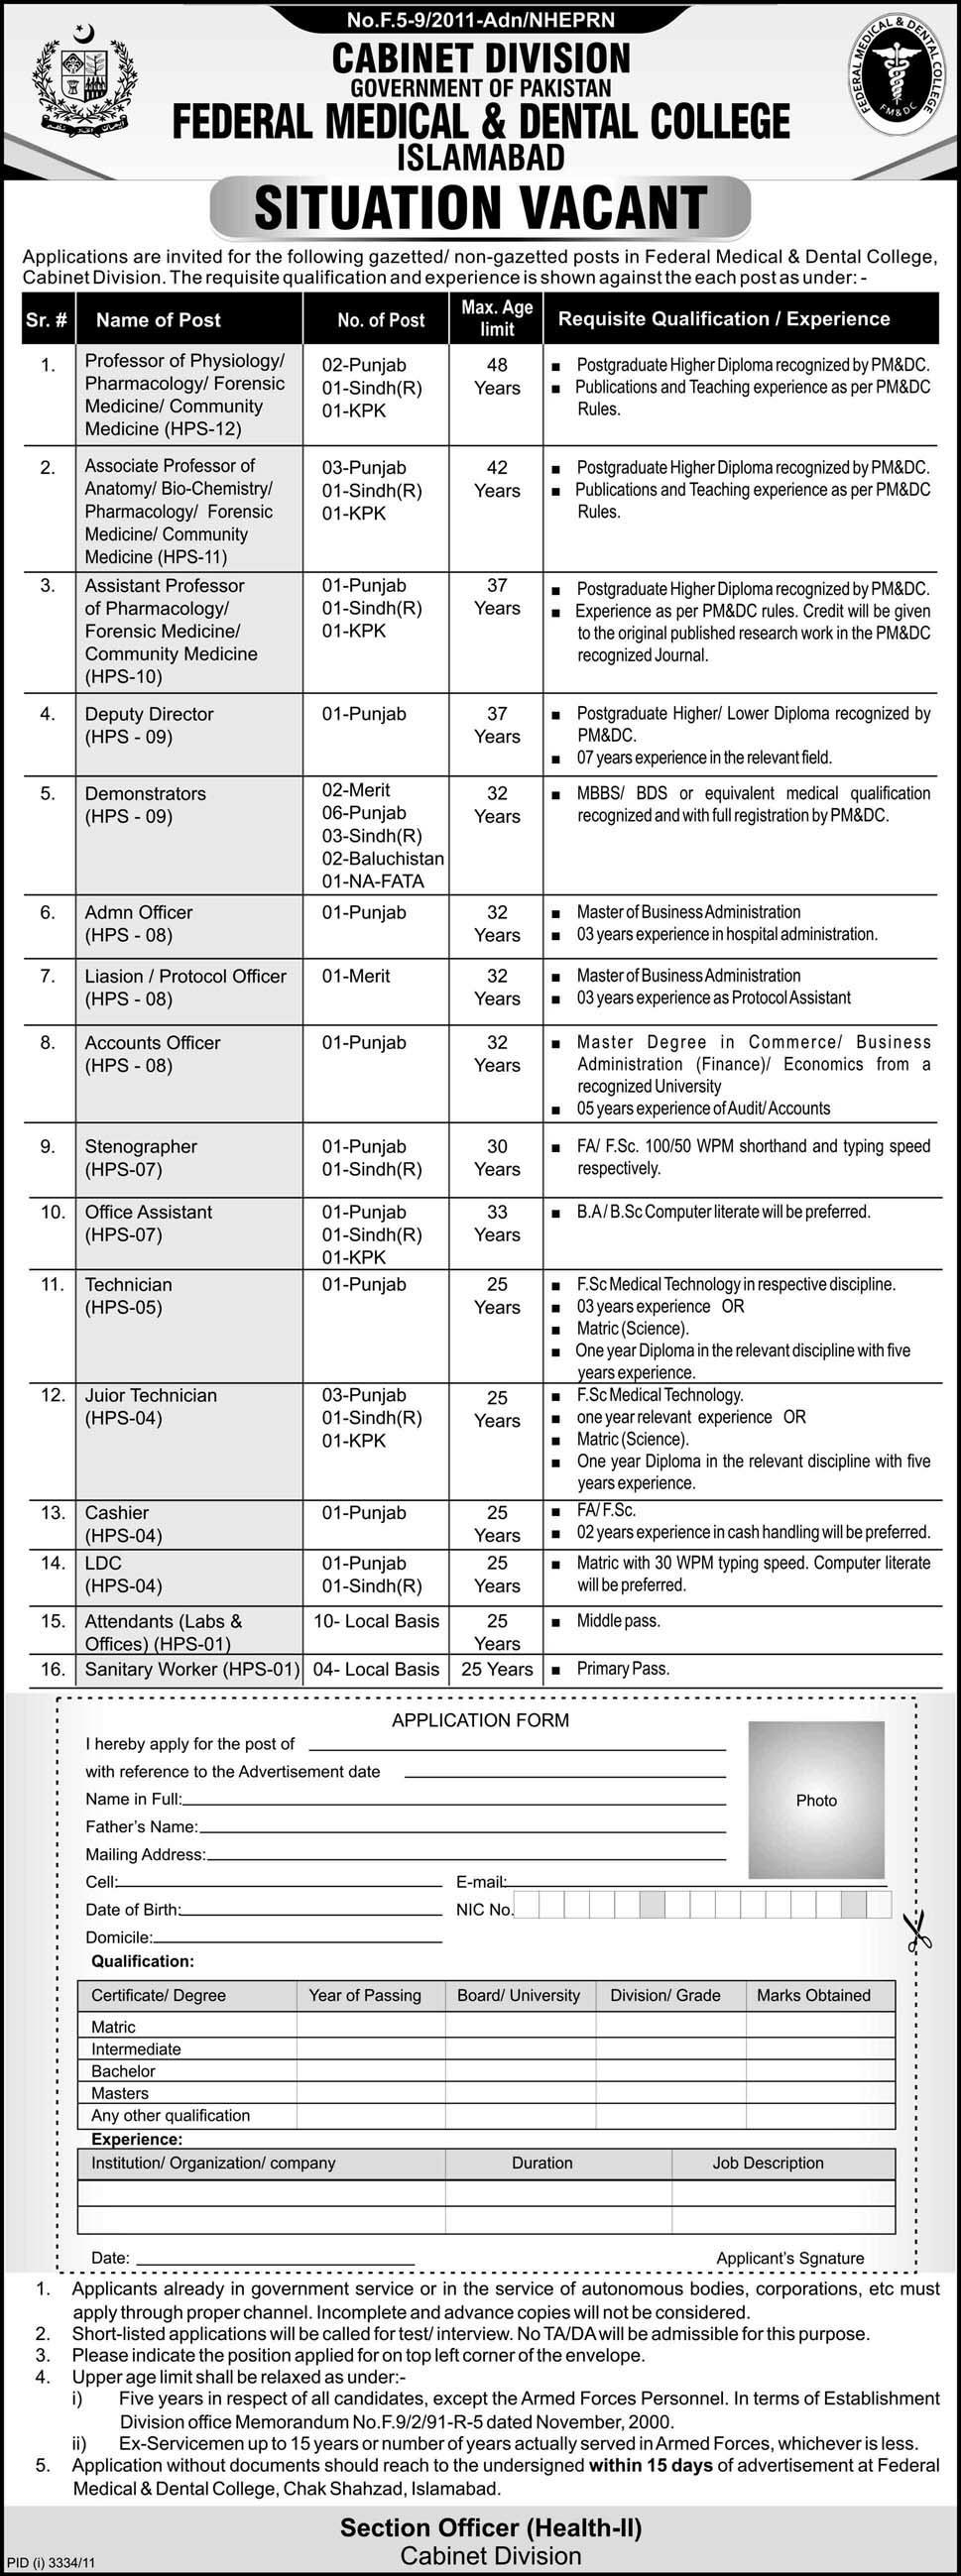 Federal Medical & Dental College Islamabad Jobs Opportunity